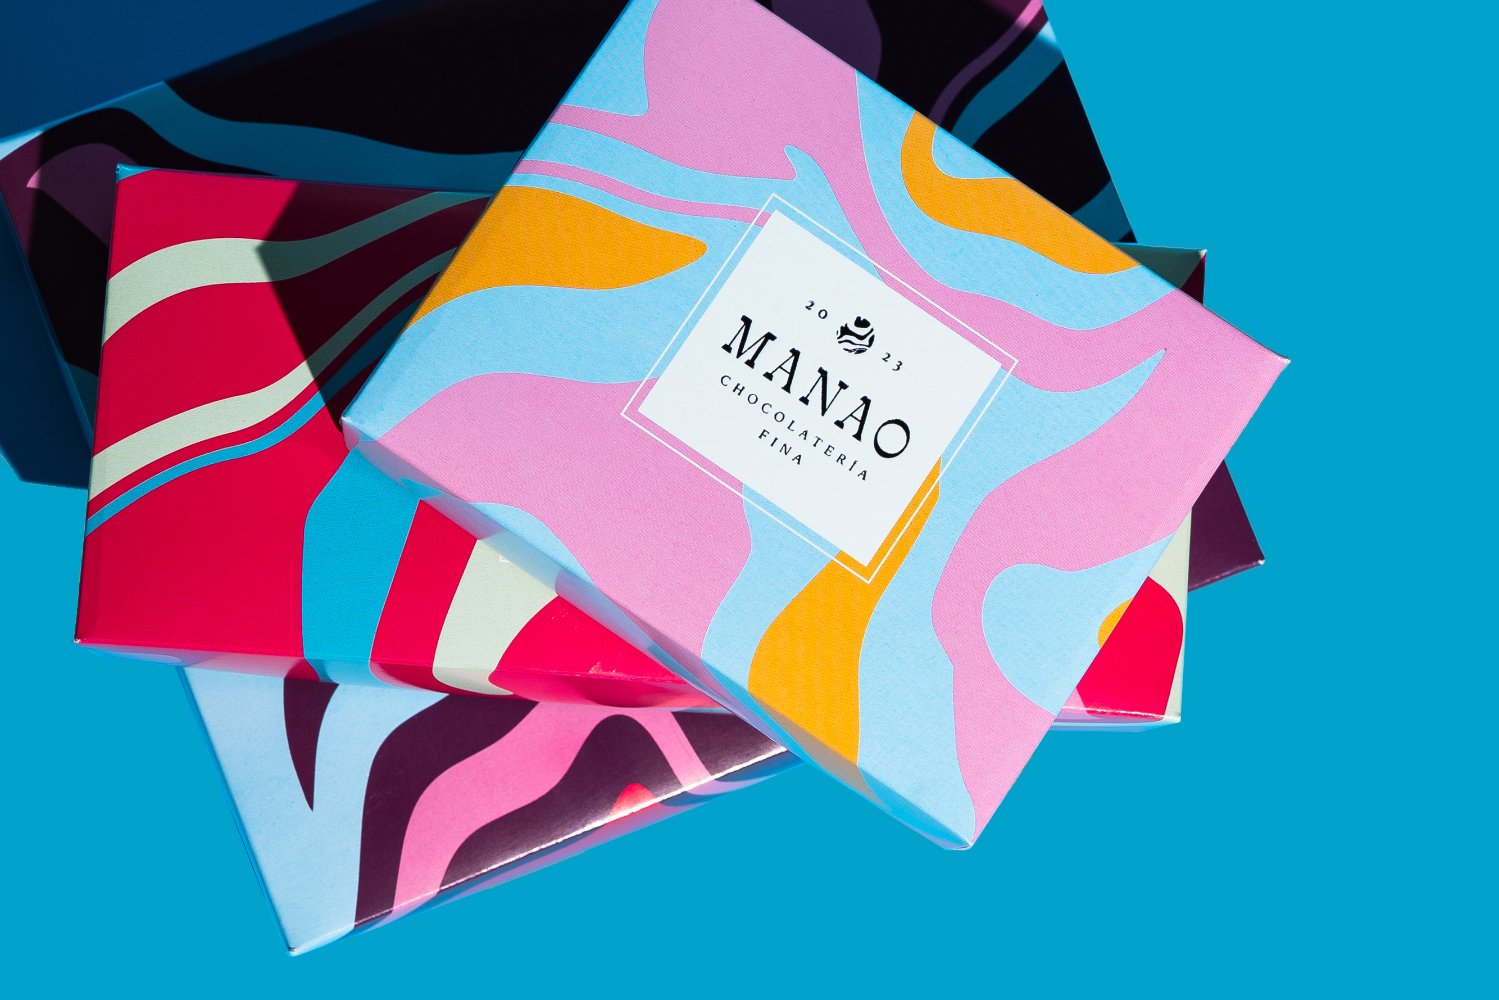 Manao Chocolate’s Colorful Design Has All the Fun of a Childhood Art Project